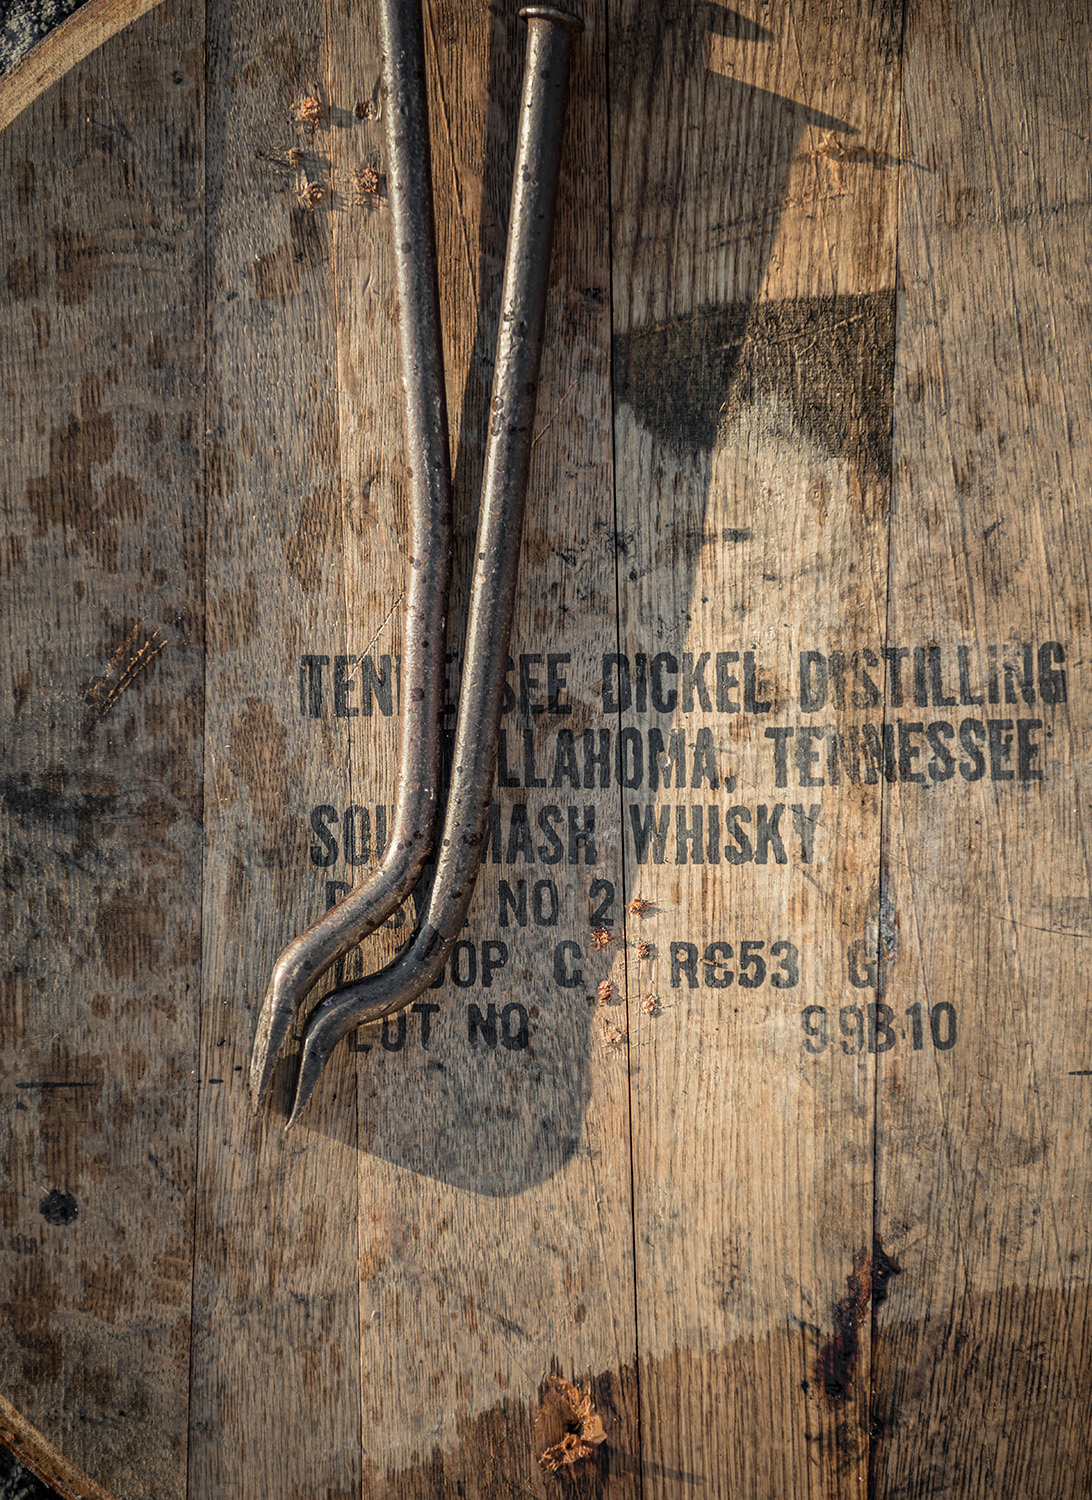 Whiskey barrel head at George Dickel Distillery. Stock photo by Nashville product and beverage photographer Kristina Krug